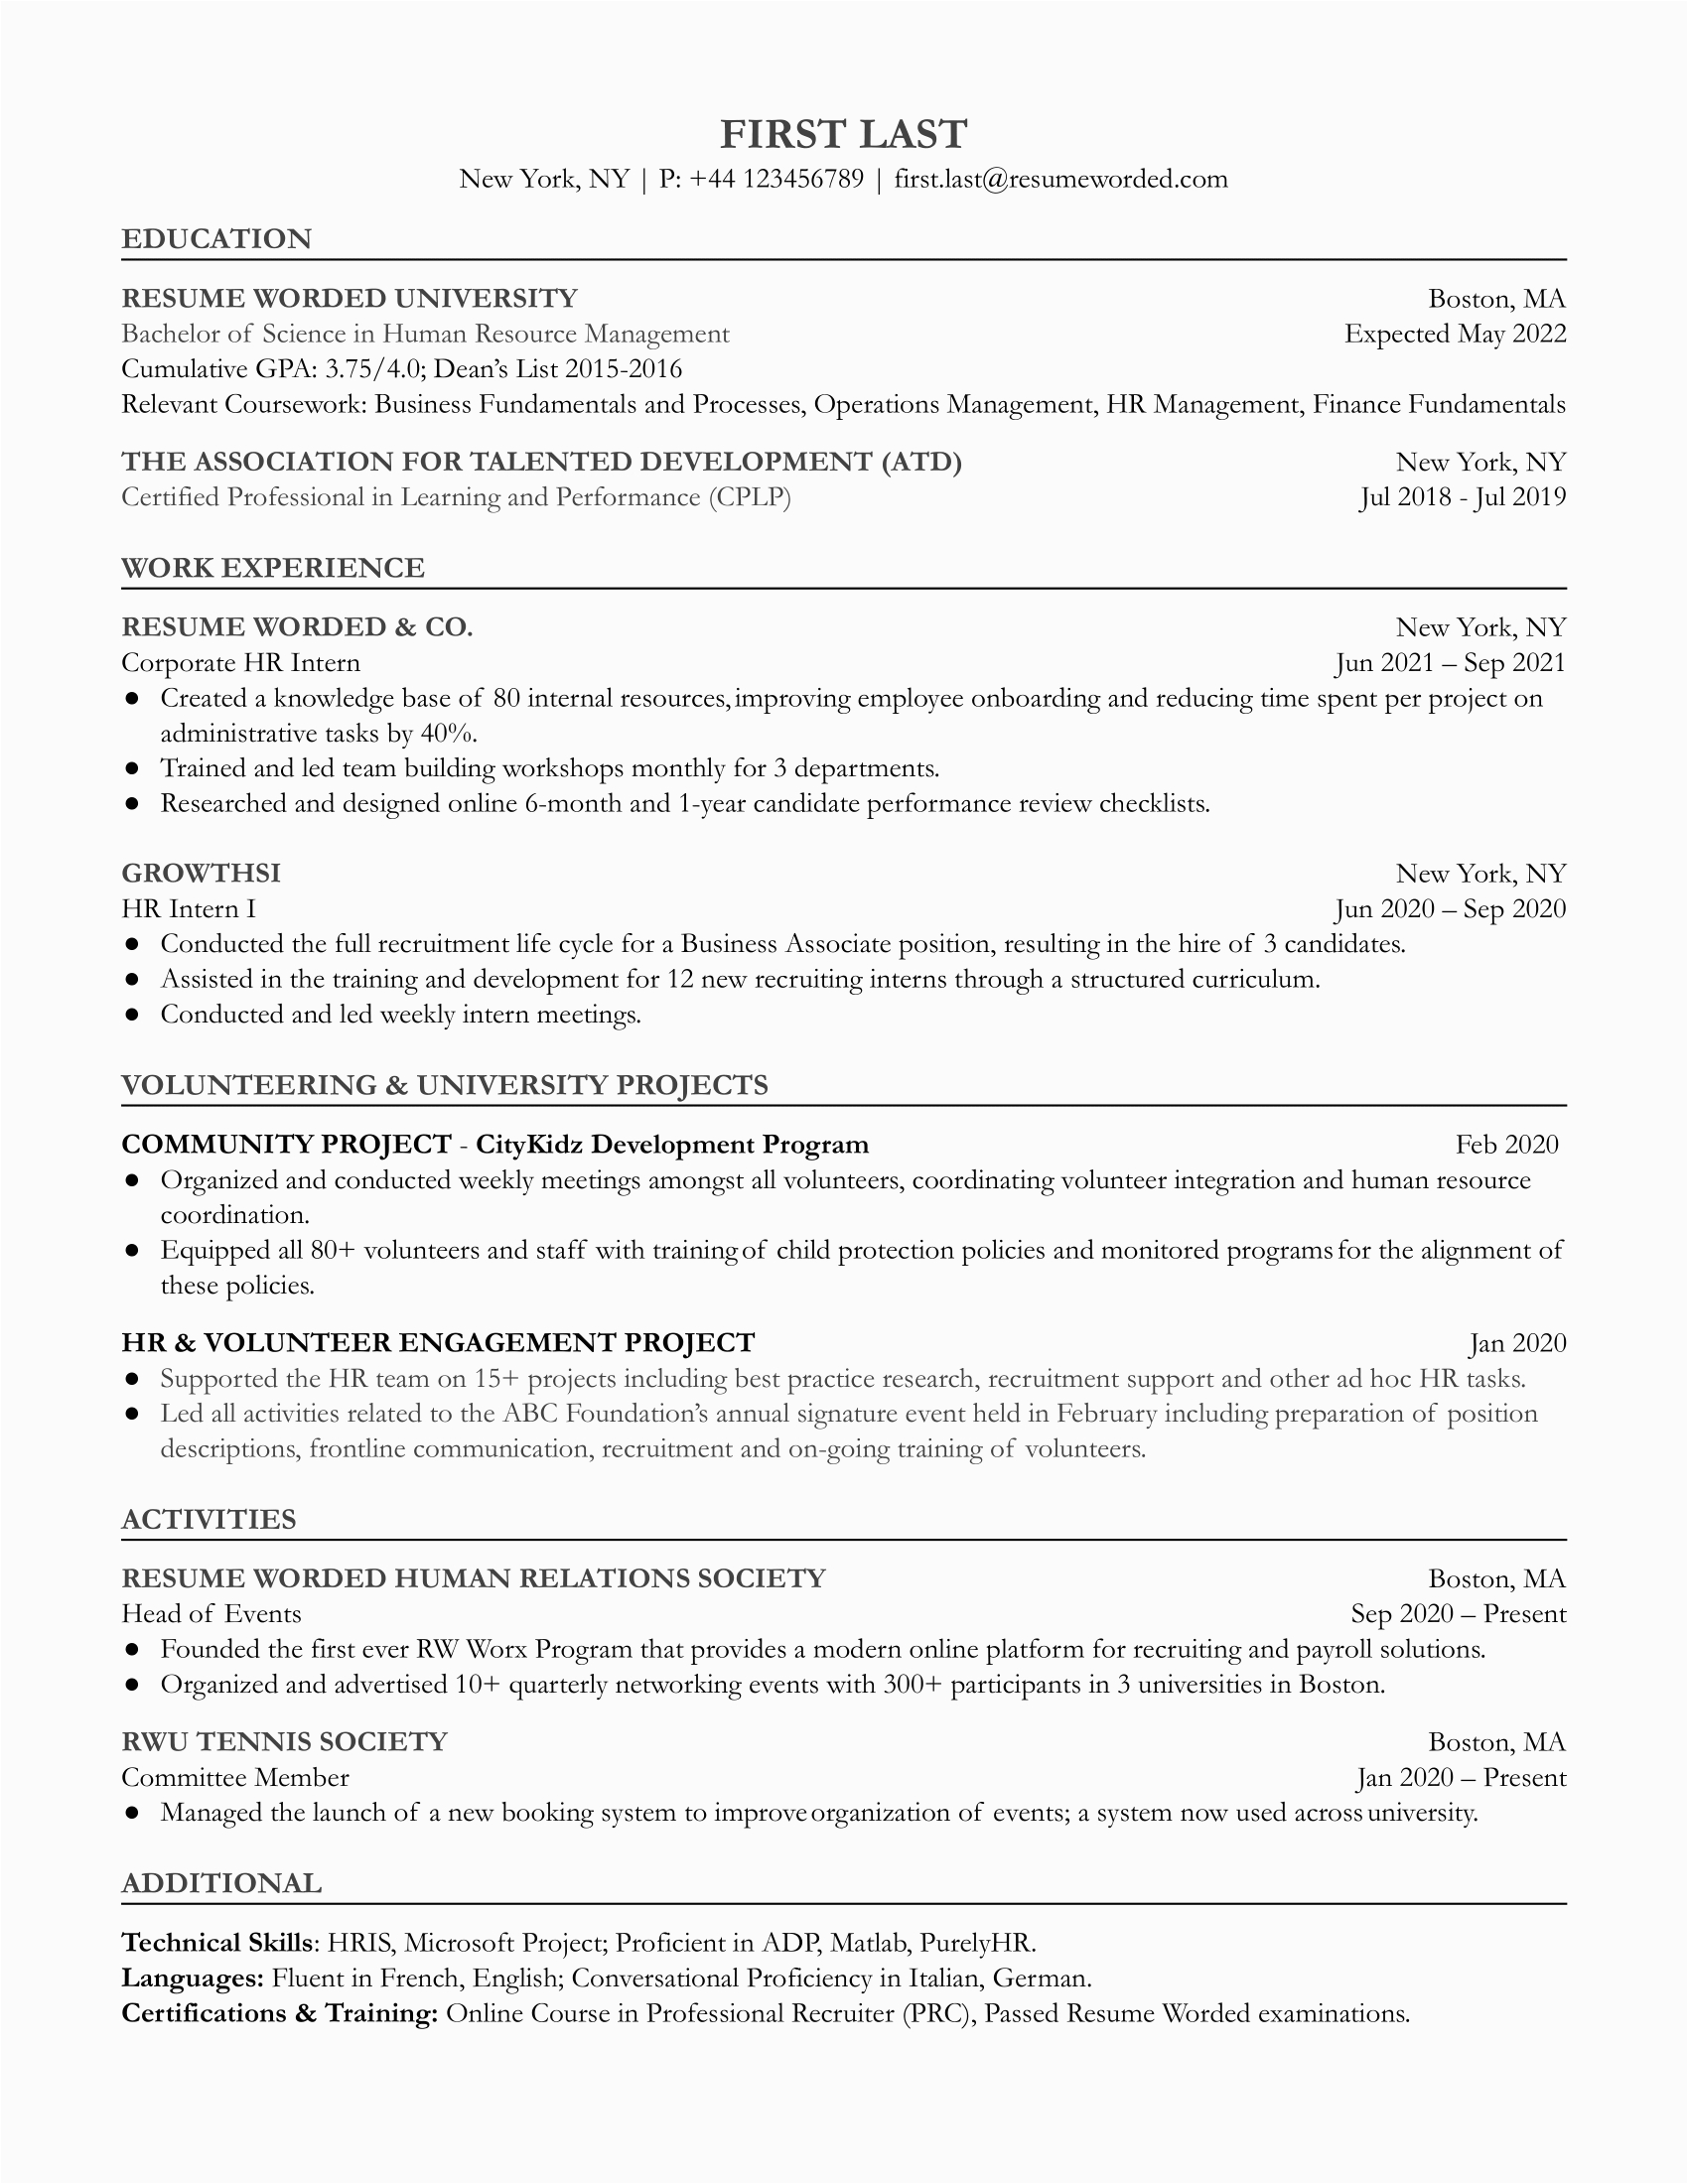 Human Resources Resume Sample Entry Level Senior Human Resources Manager Human Resources Director